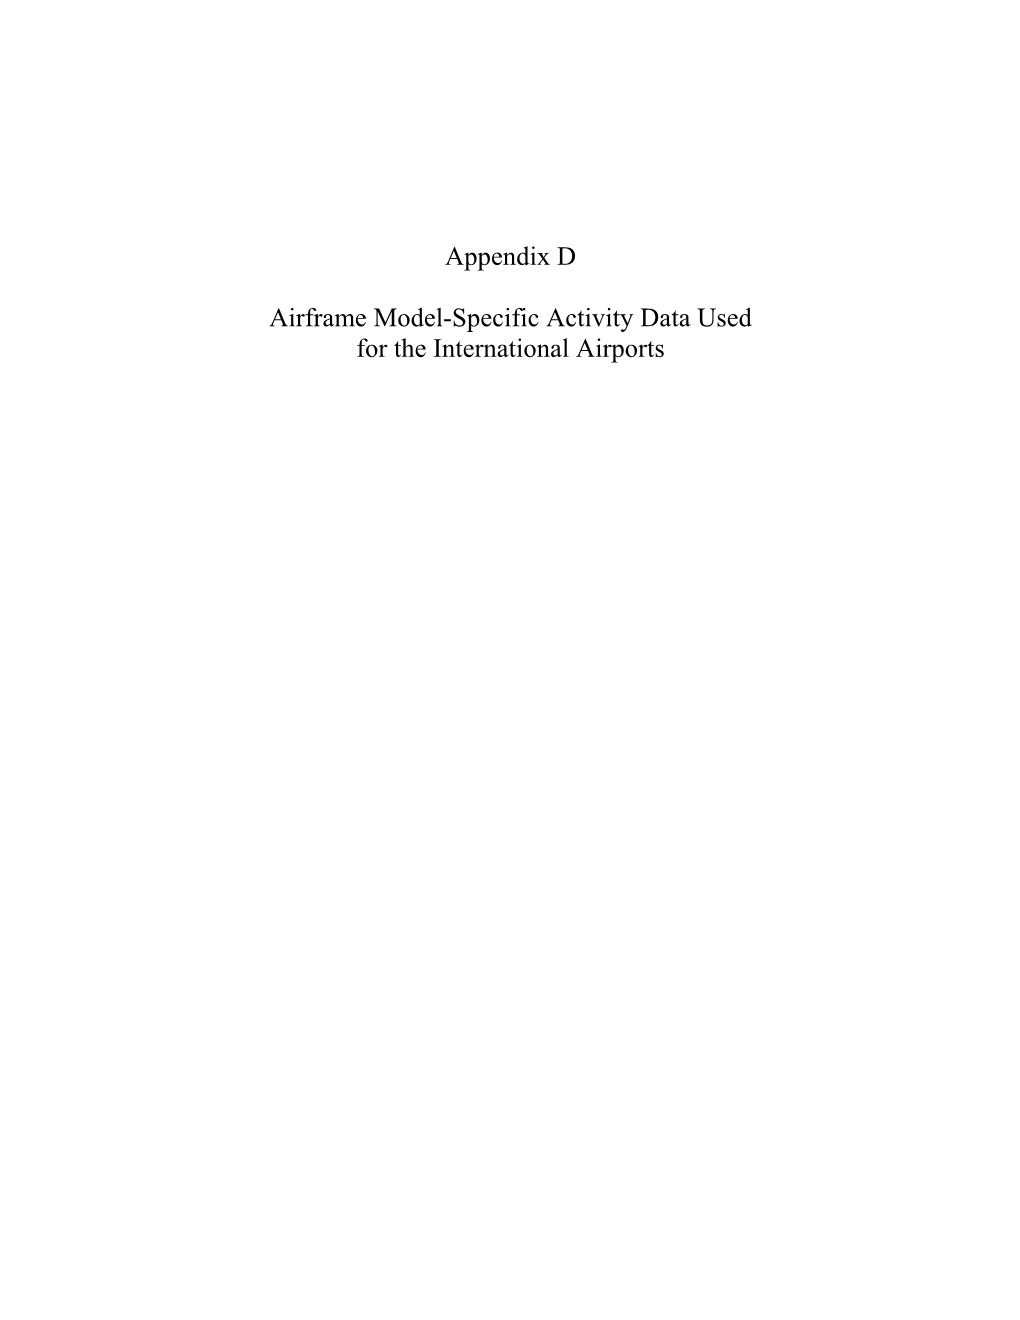 Appendix D Airframe Model-Specific Activity Data Used for the International Airports